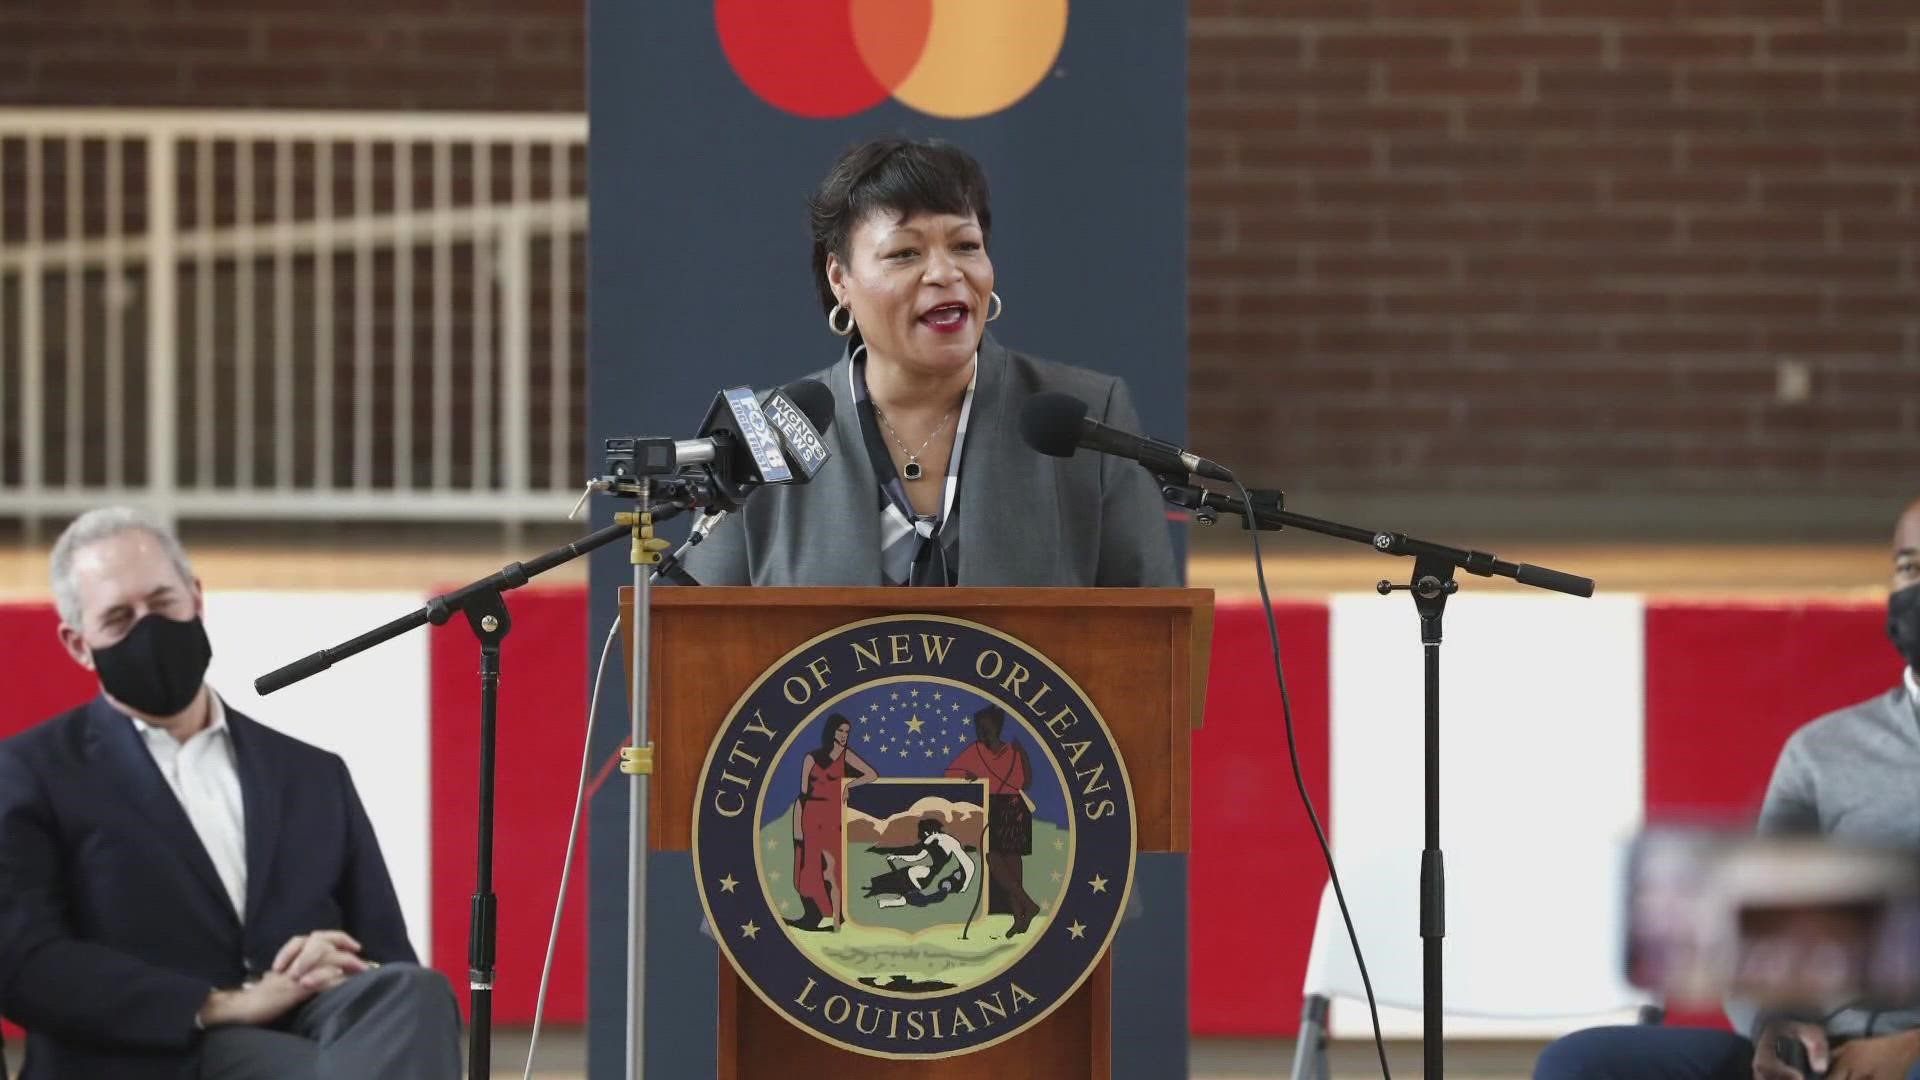 Mayor Cantrell currently has a lowly 31% job approval rating.